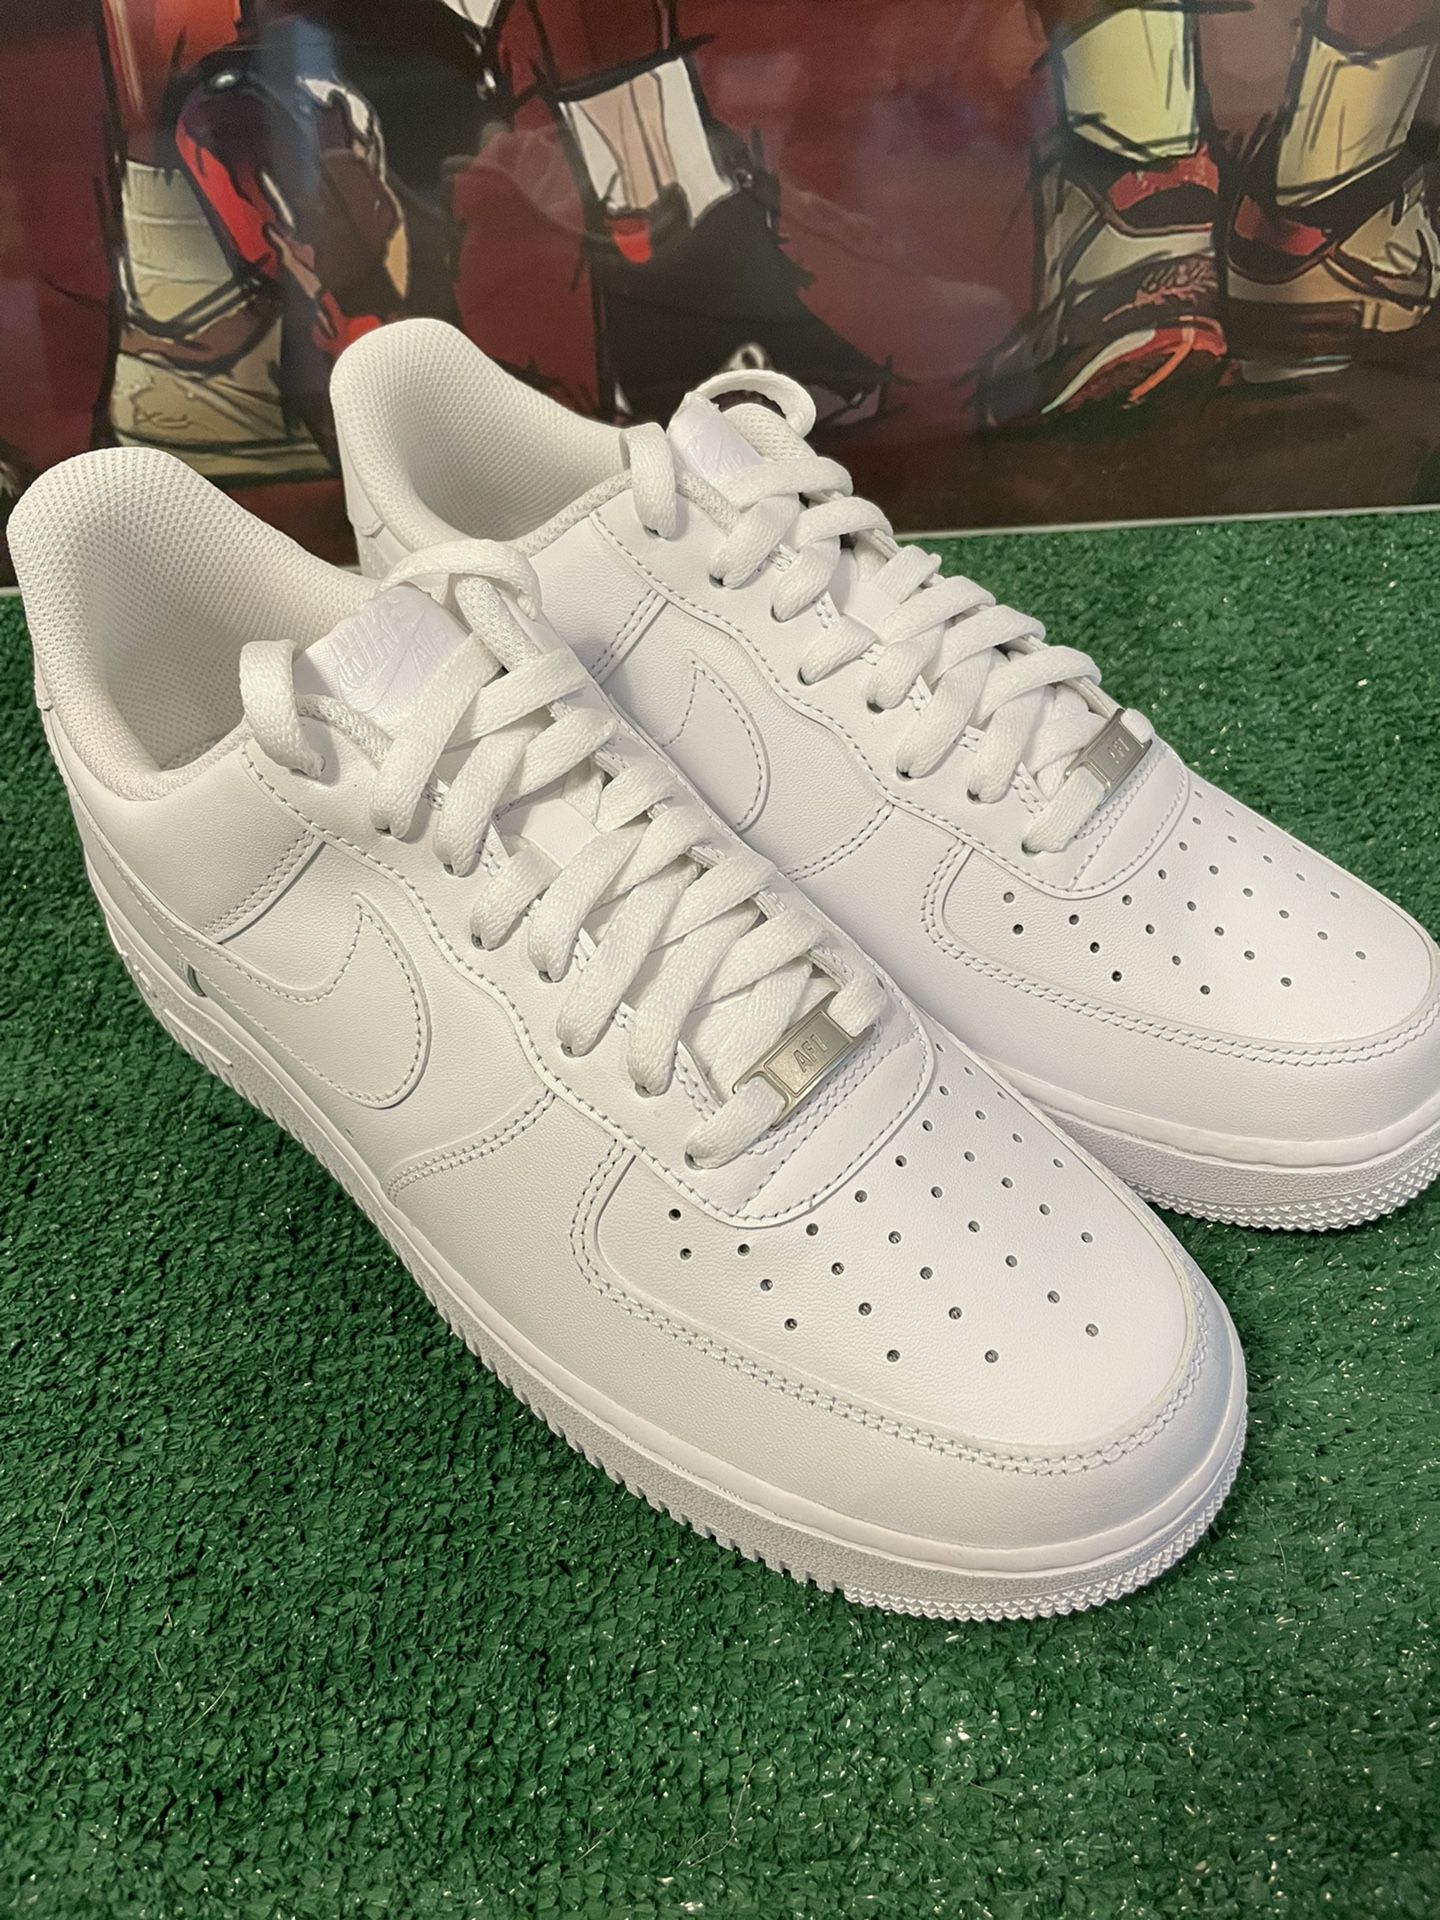 Nike Air Force One 1 AF1 Low Men's Triple White Size 10 Sneakers for Sale  in Vista, CA - OfferUp